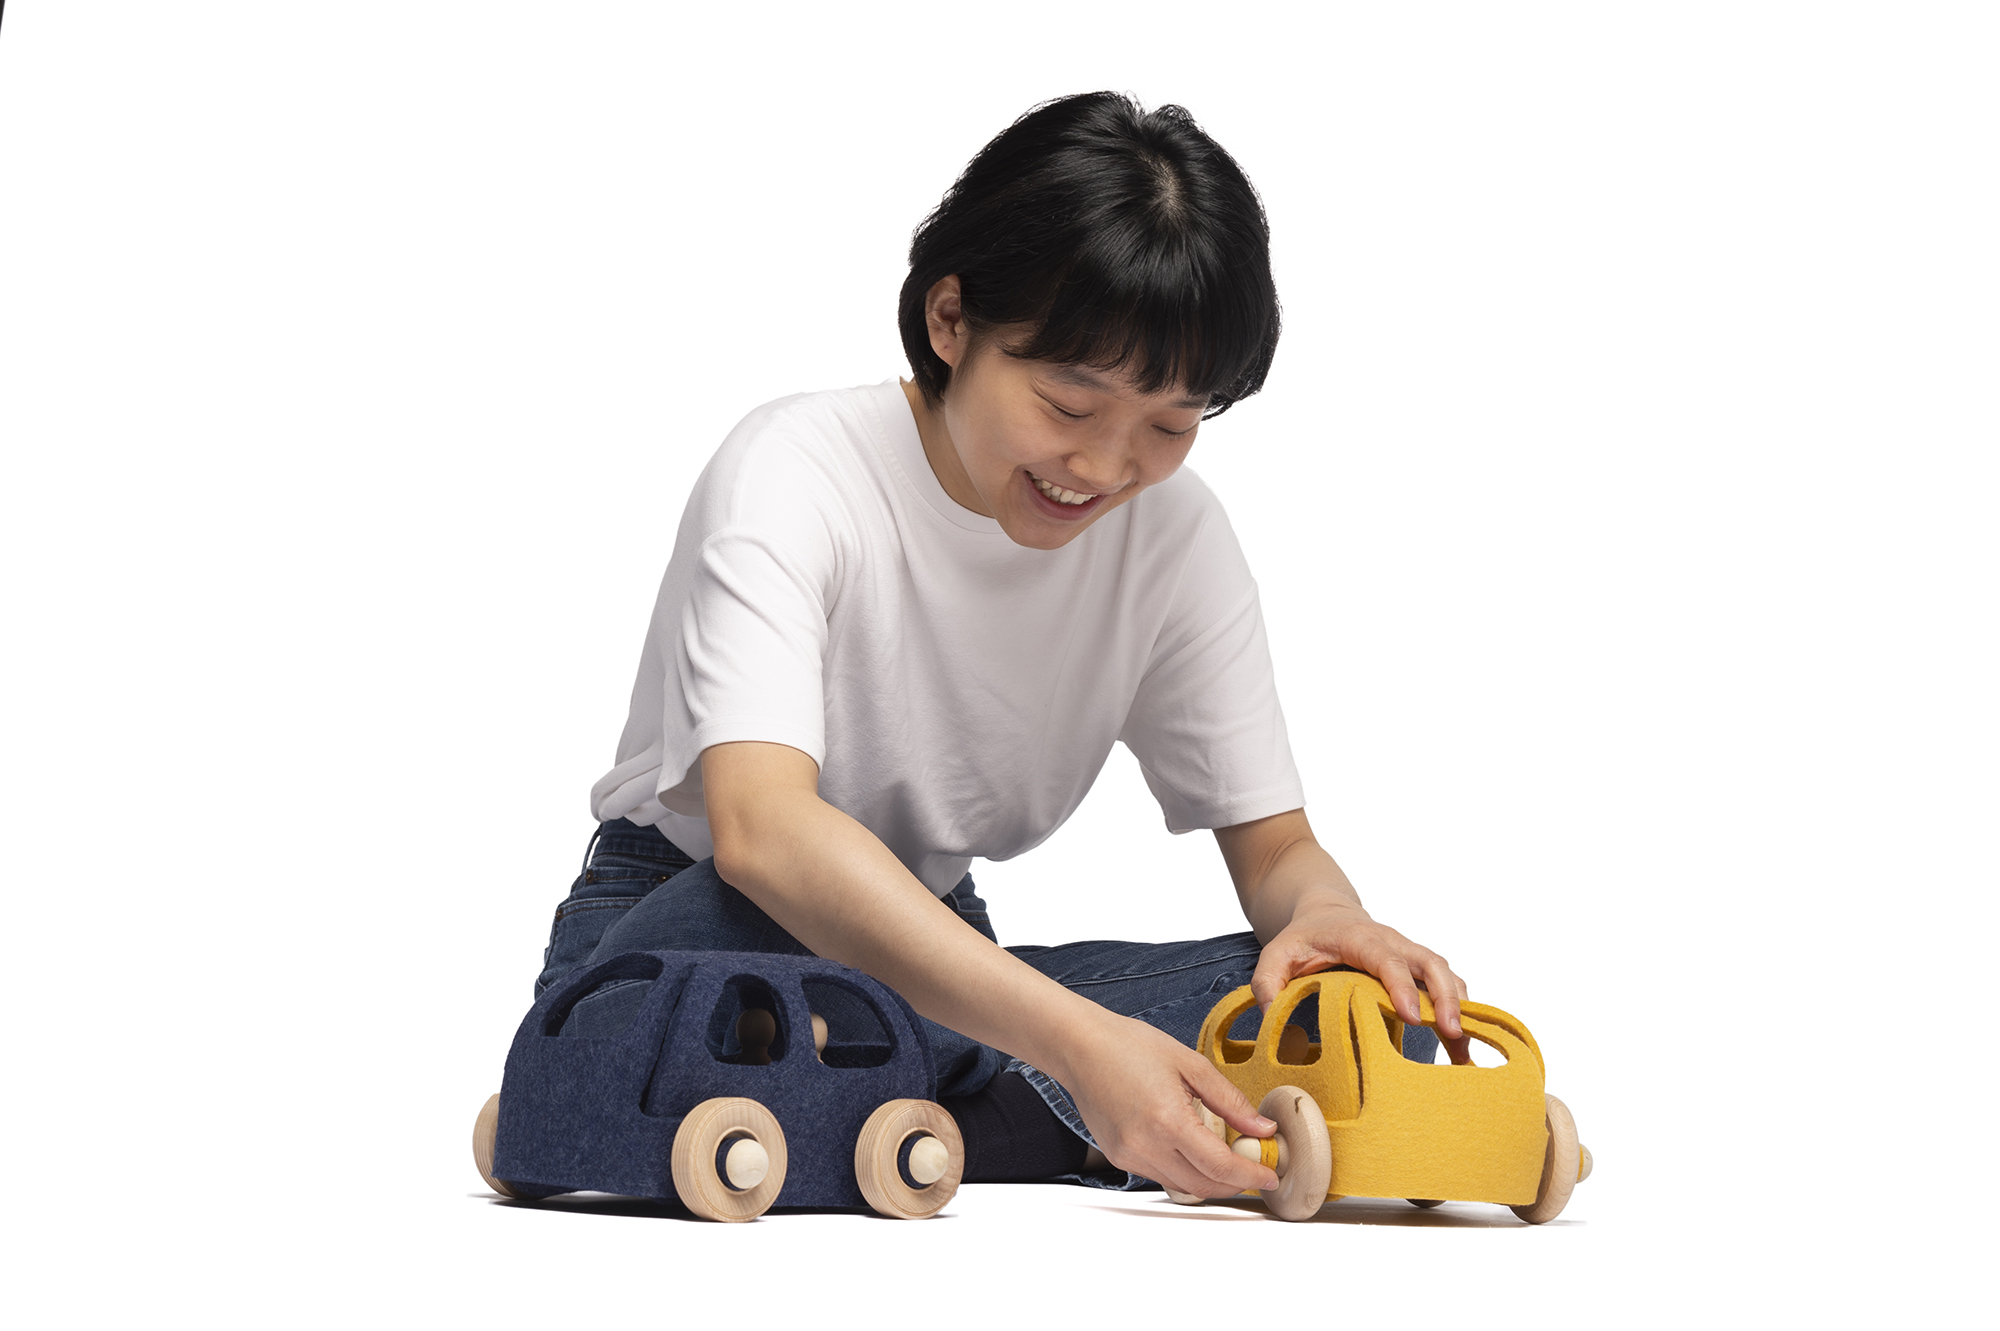 A person plays with toy cars made out of fabric and wooden wheels.